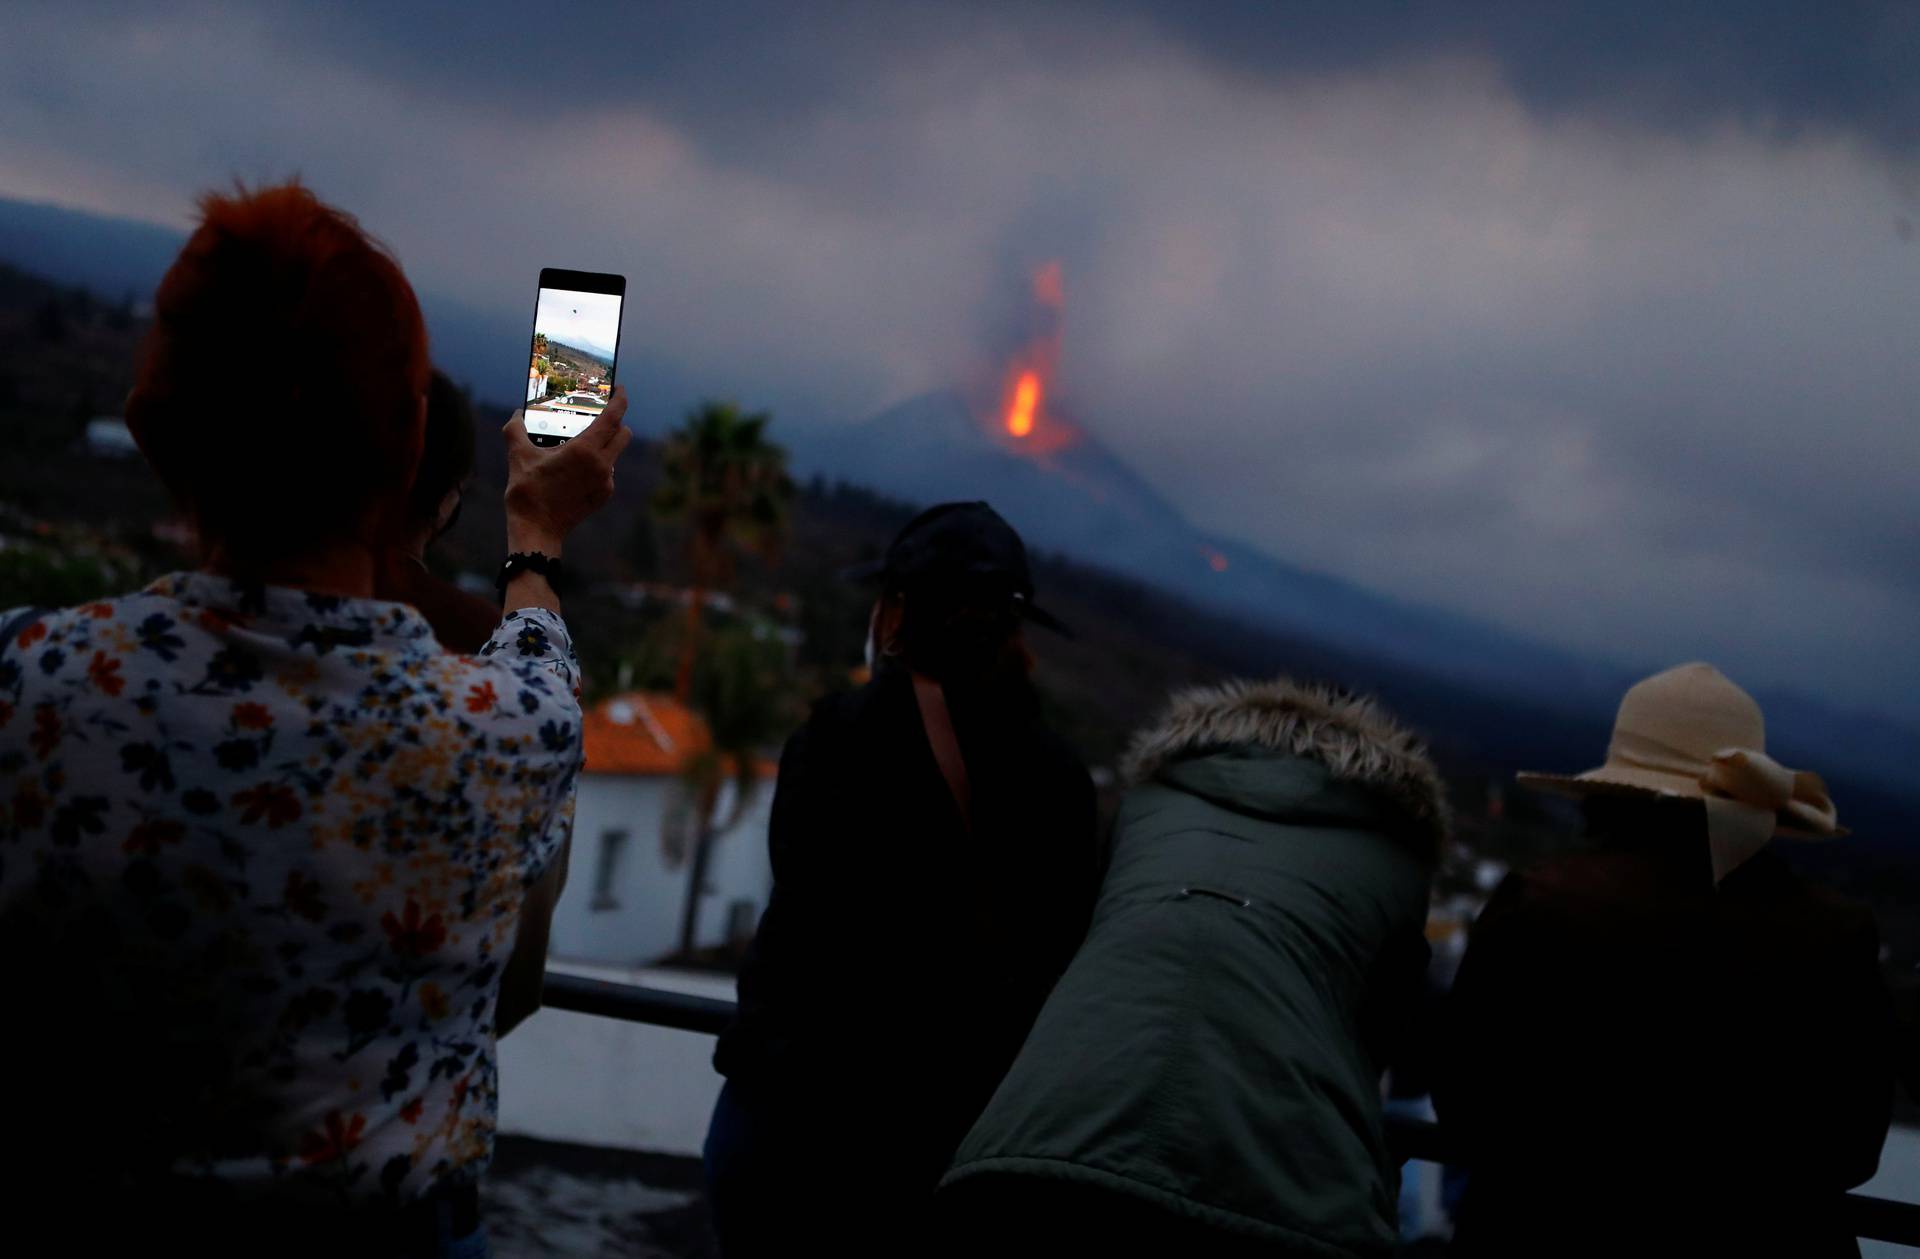 Tourists arrive at the Tajuya viewpoint to see the Cumbre Vieja volcano that continues to expel lava